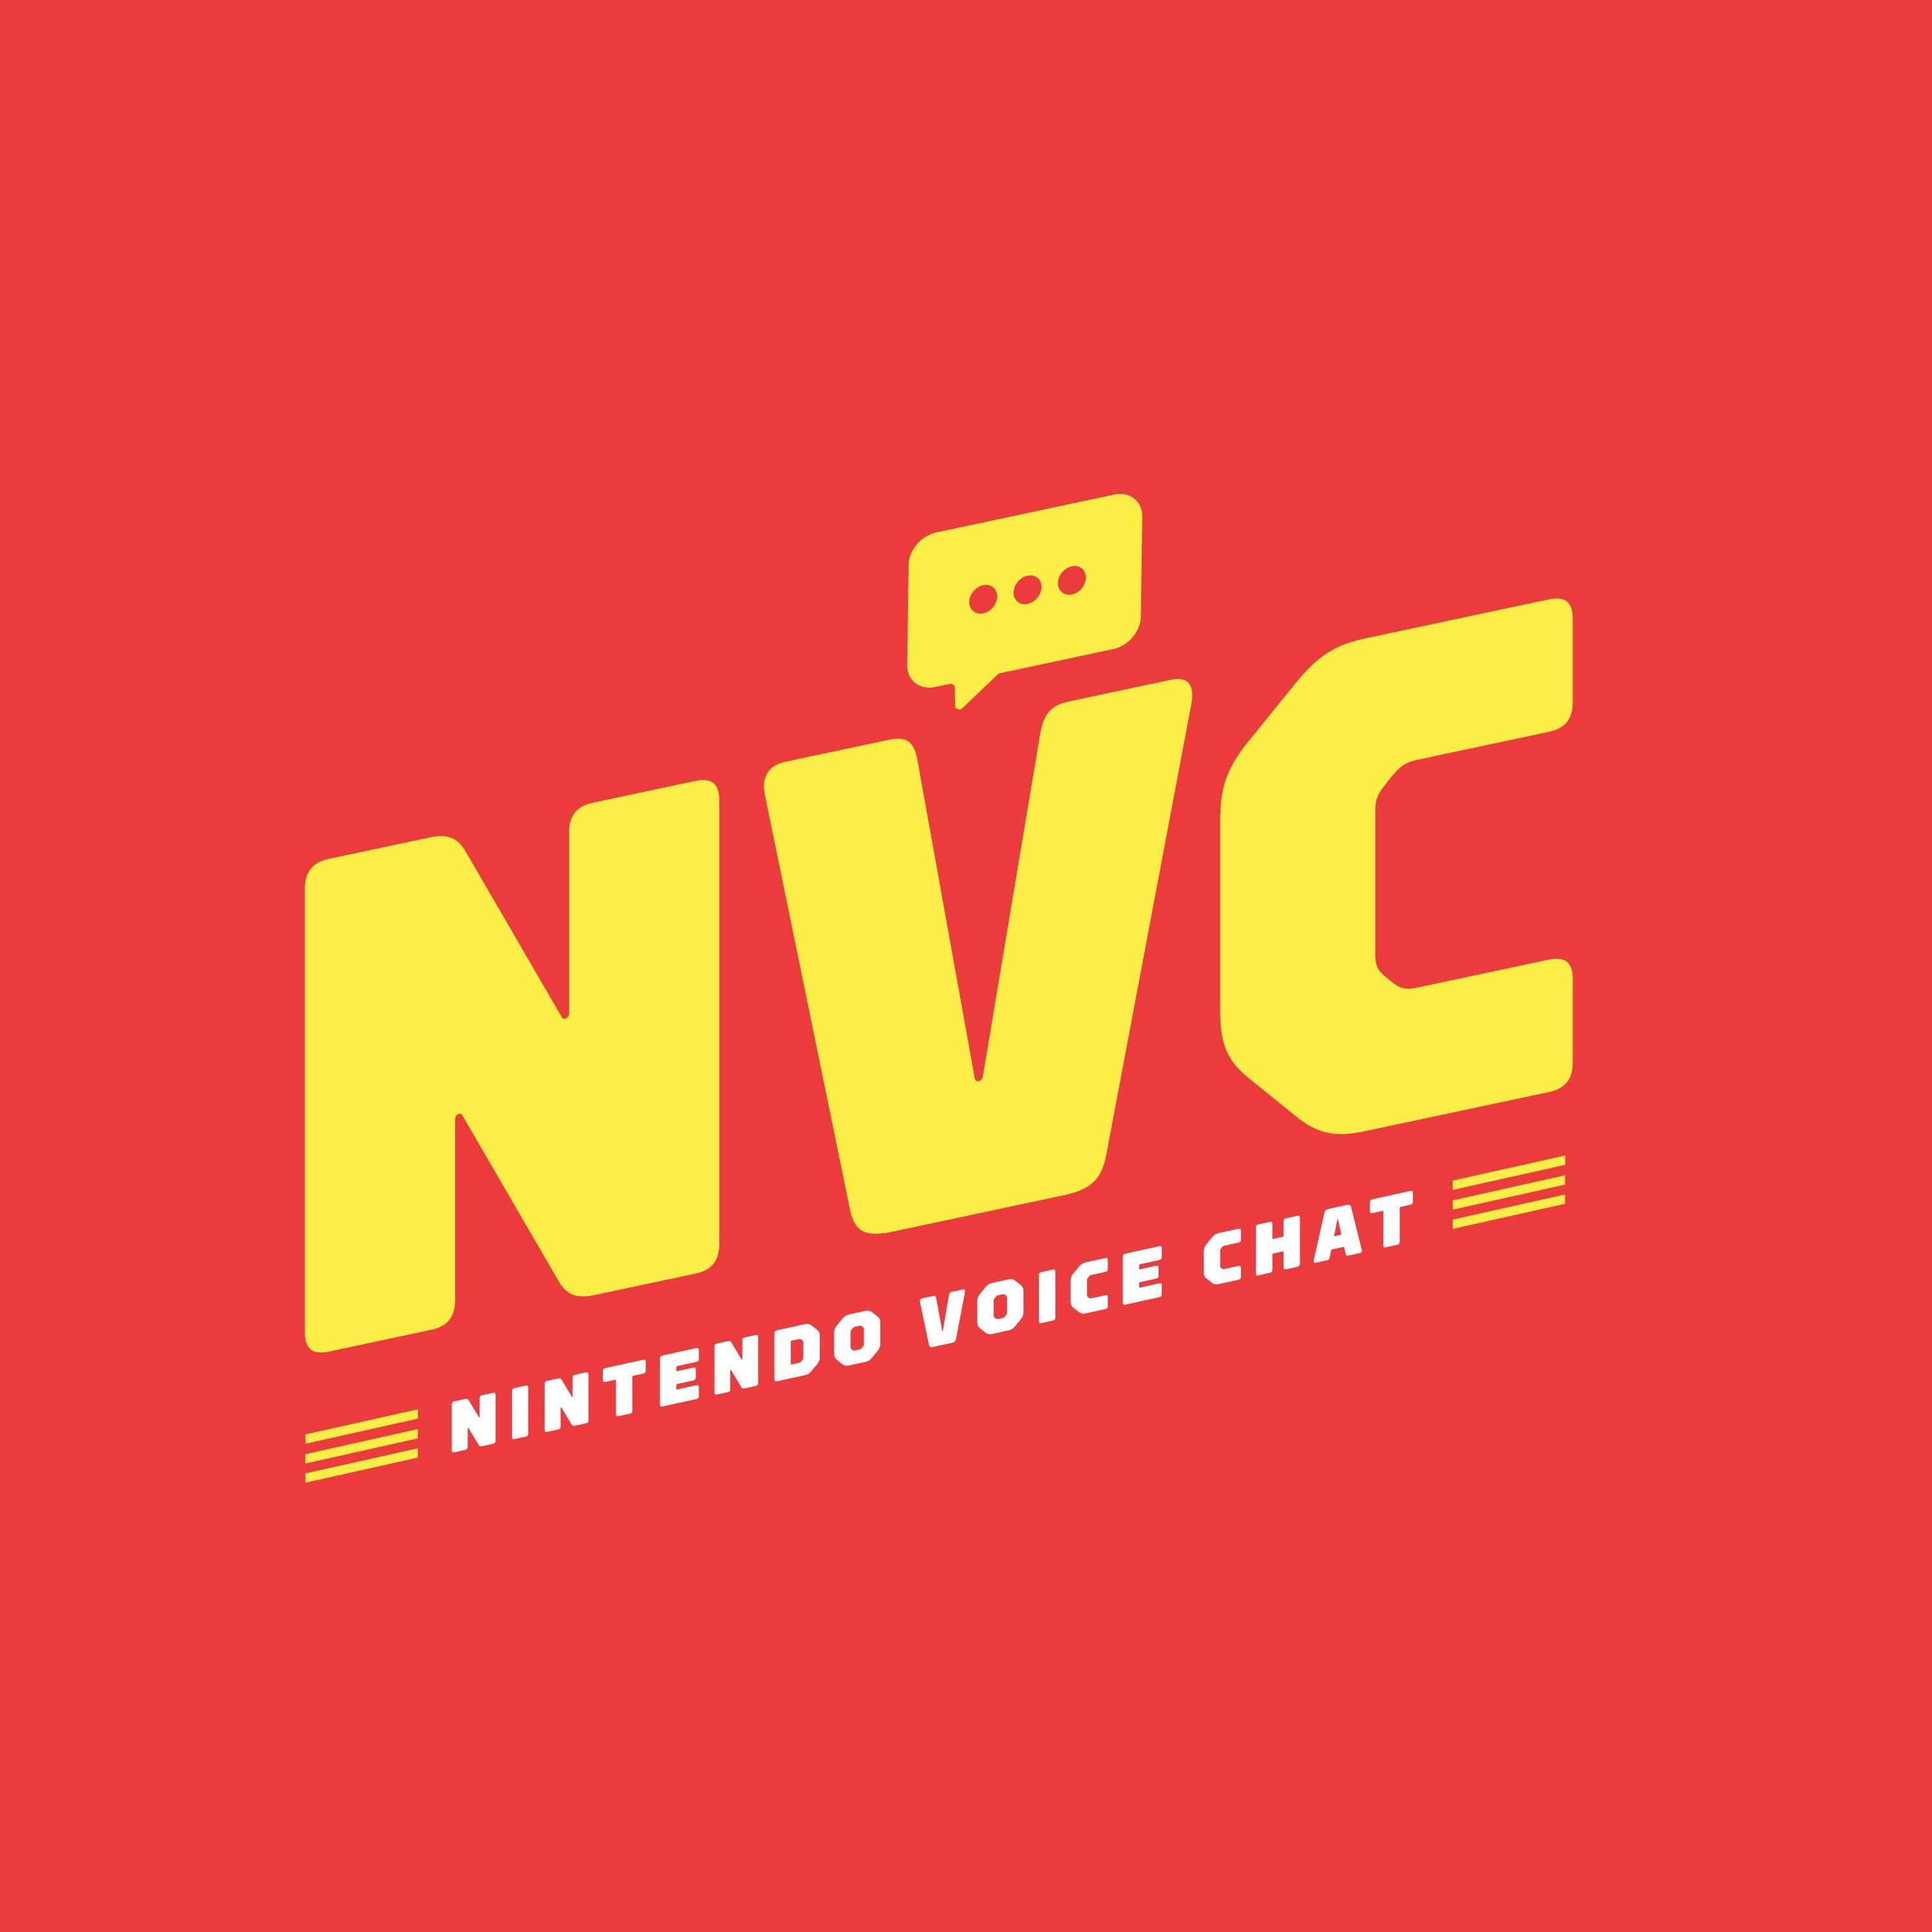 NVC 613 – When Is a Game an Homage and When Is It a Clone?